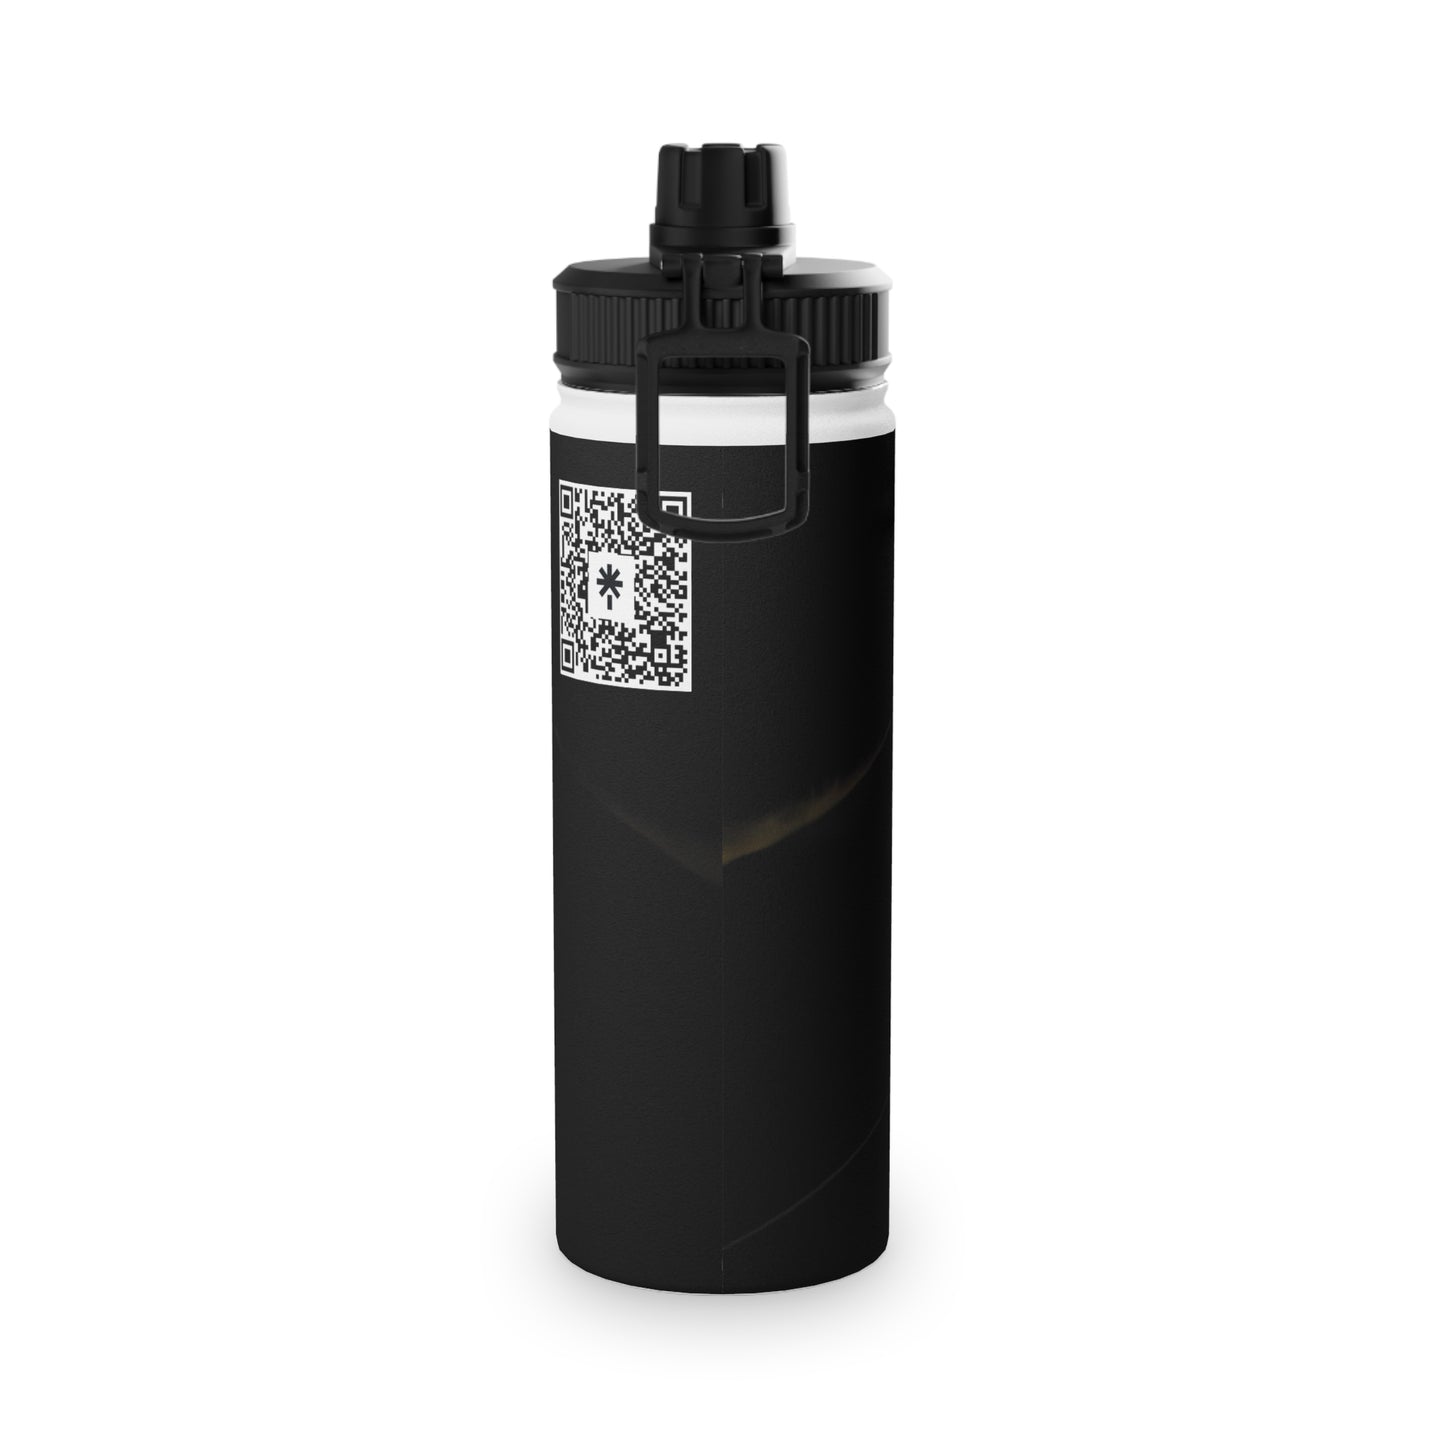 Off my chest Stainless Steel Water Bottle, Sports Lid